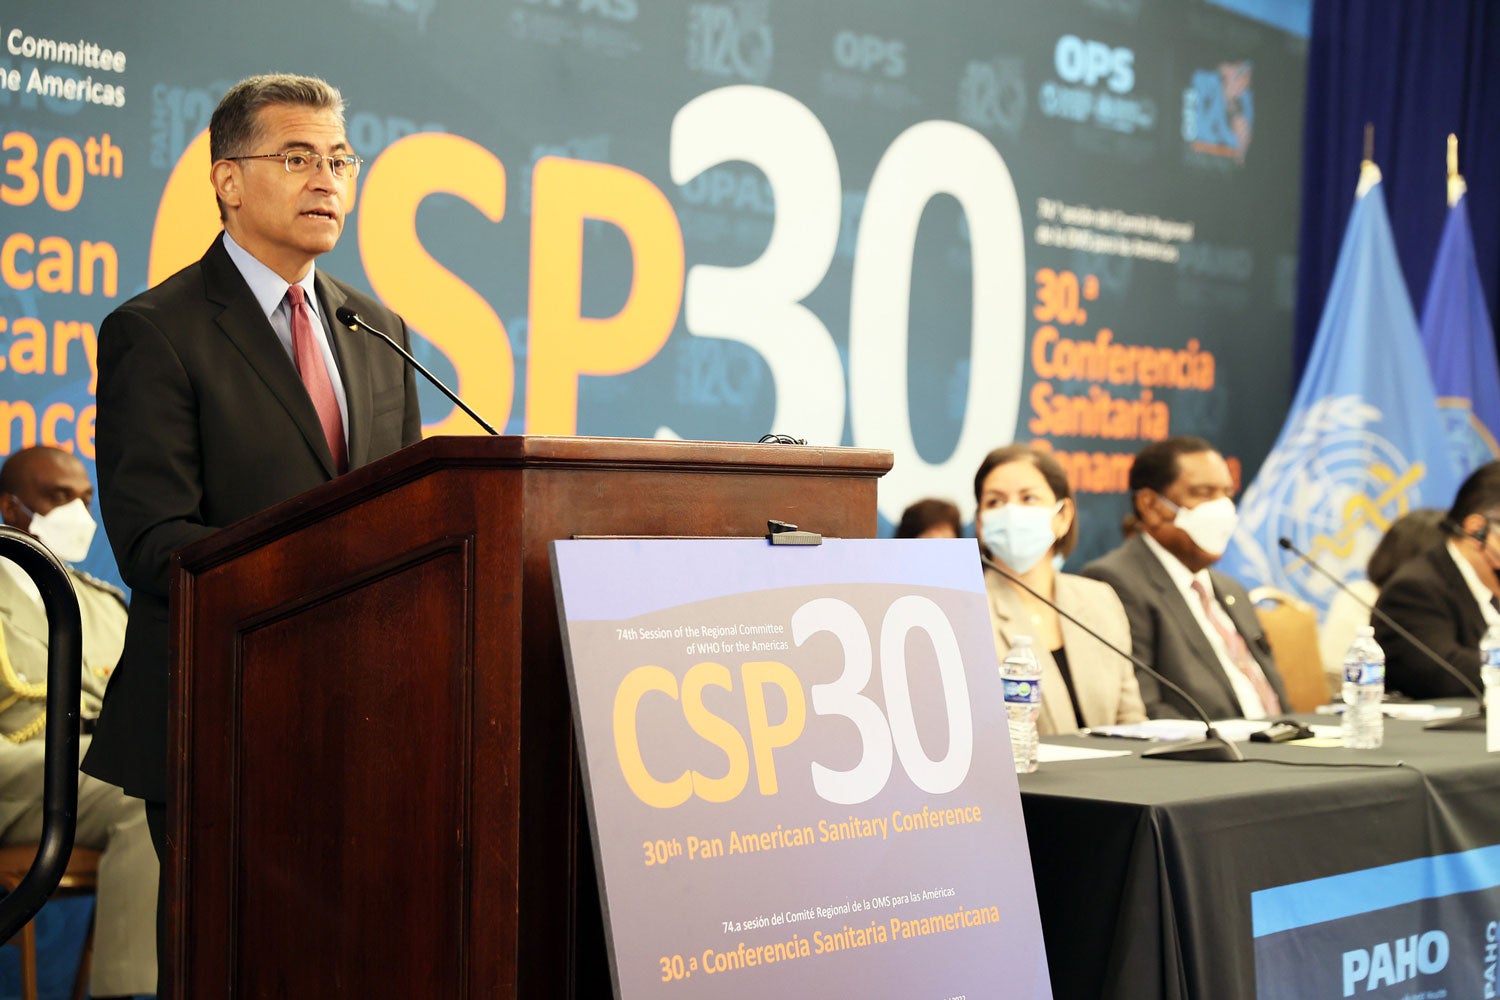 Xavier Becerra, Secretary of the United States Department of Health and Human Services